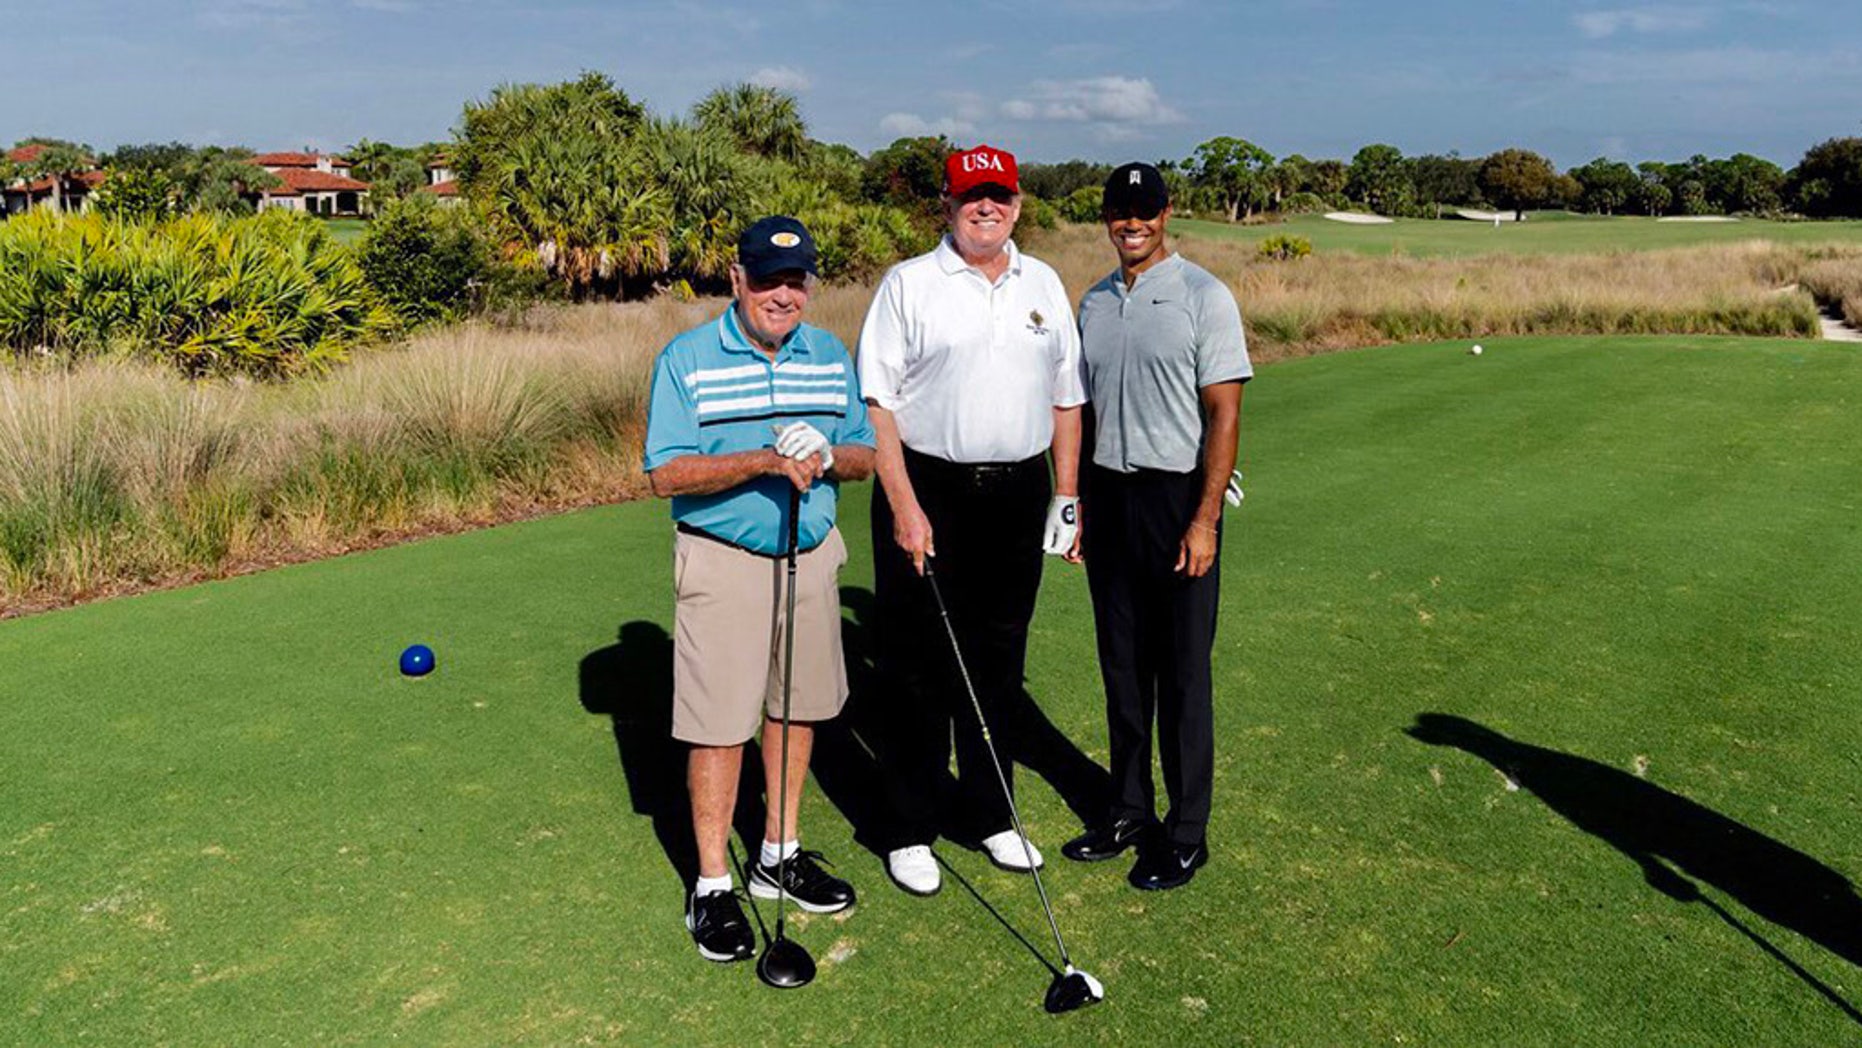 Trump golfs with greats Tiger Woods and Jack Nicklaus at his Florida club